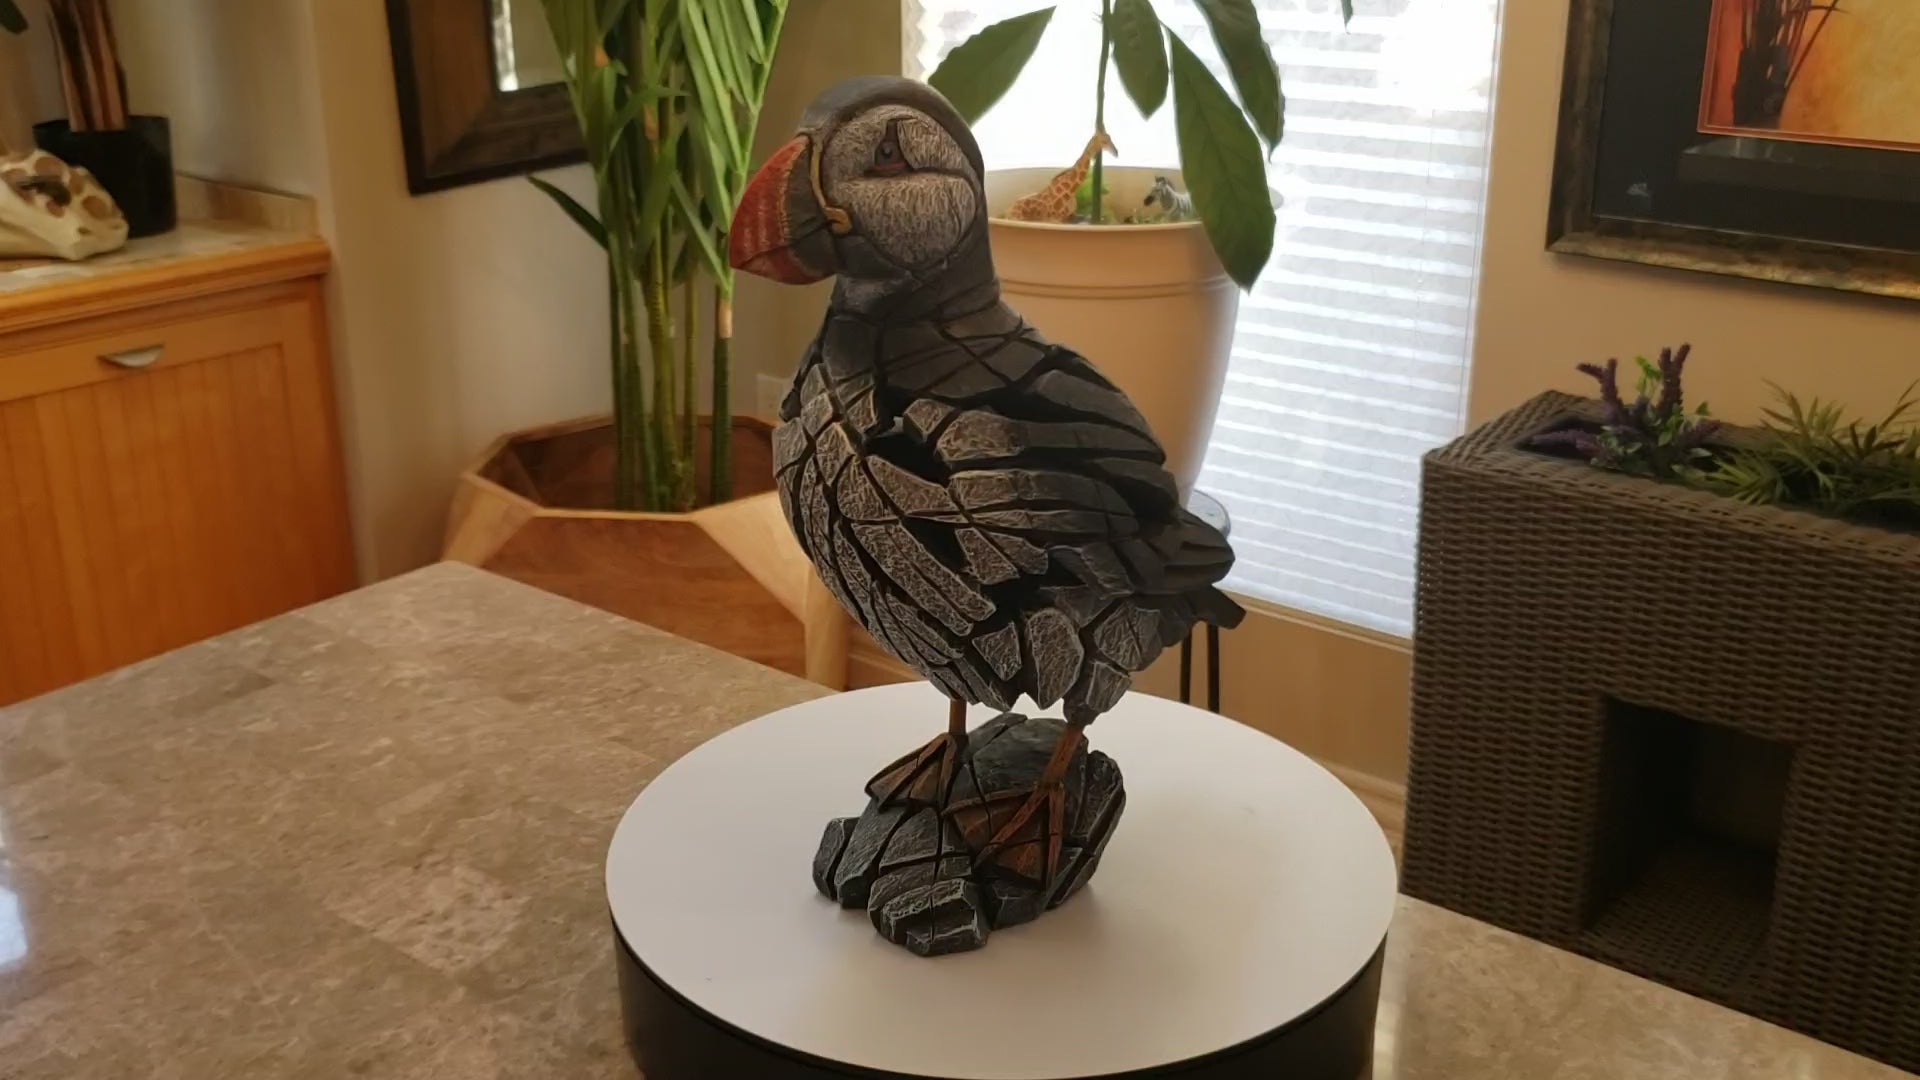 Auction for sale luxury puffin bird statue